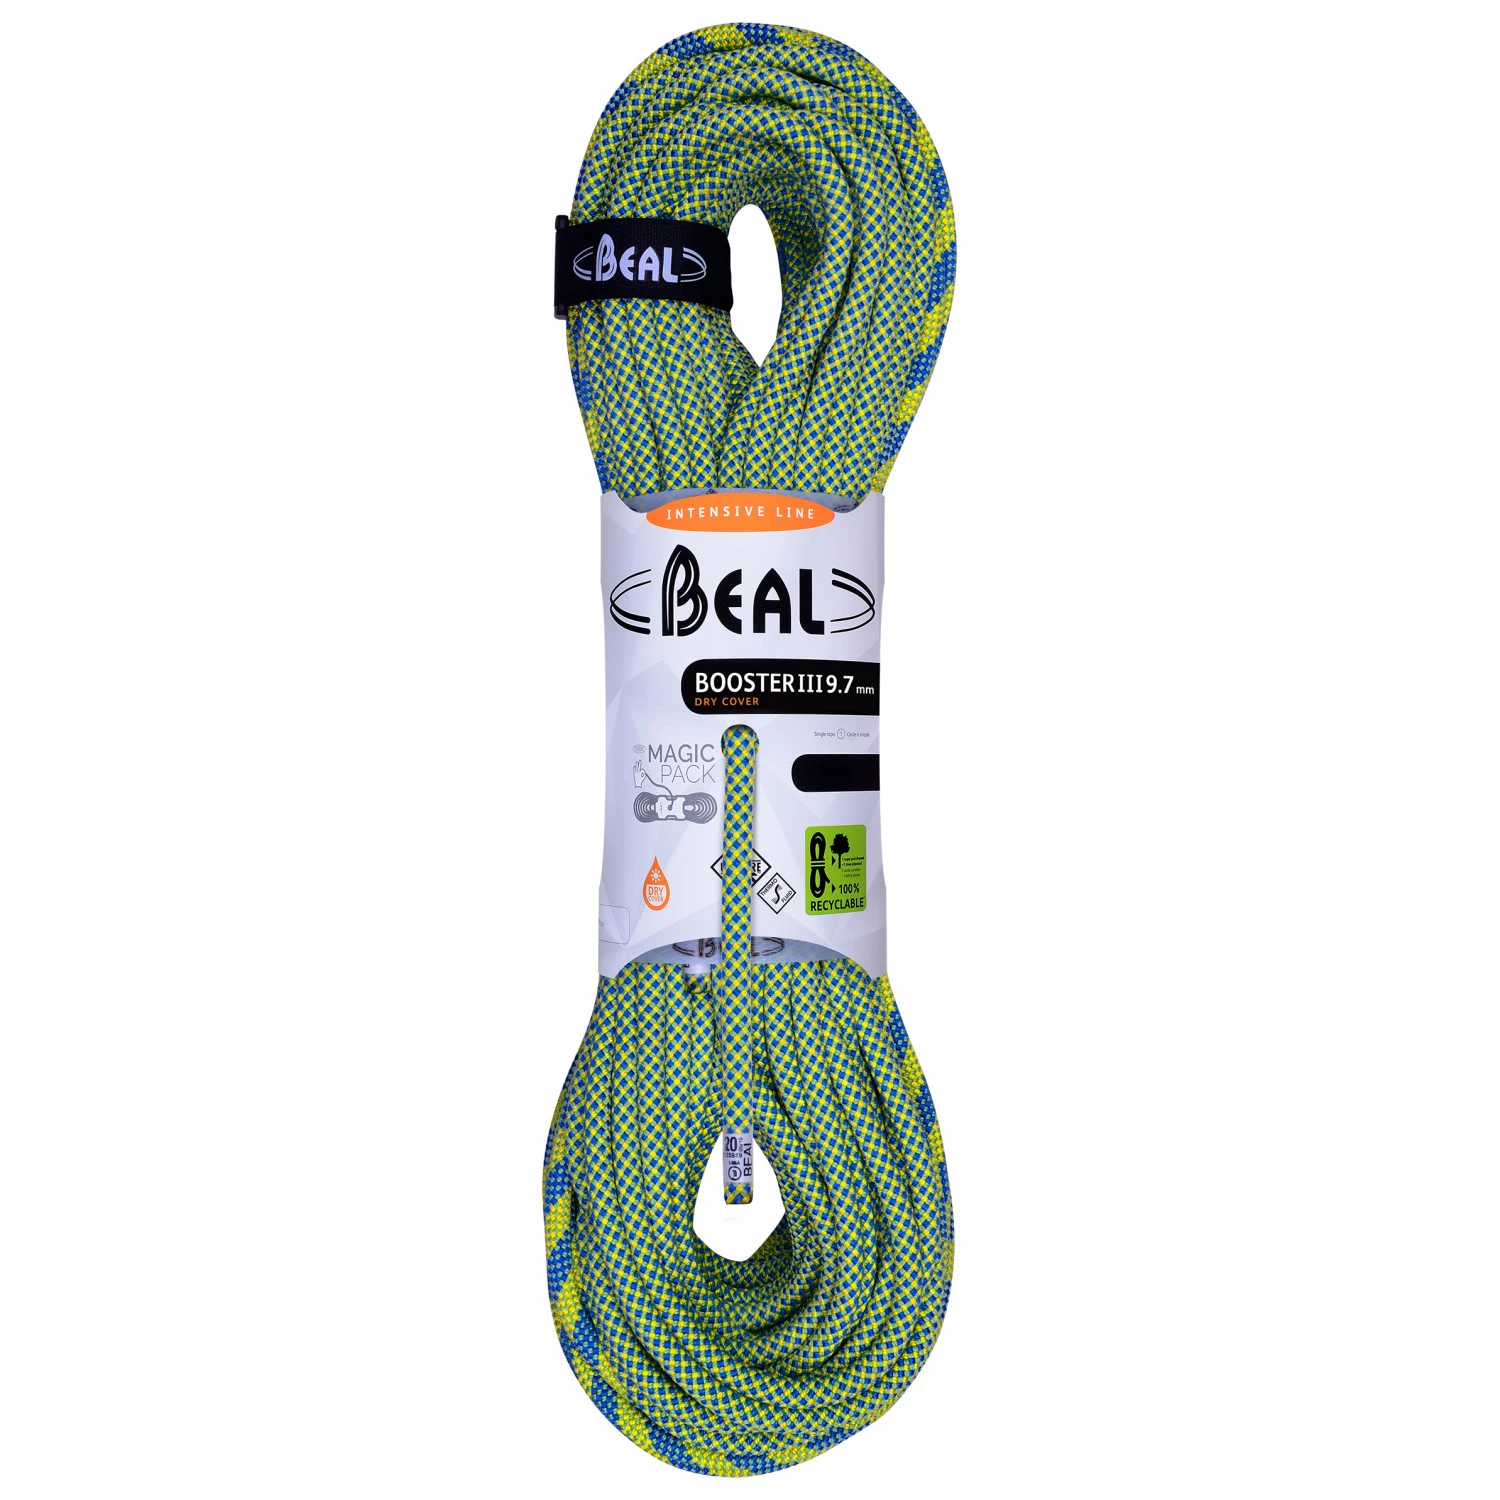 Beal Booster III 9,7 mm Unicore Dry Cover Safe Control Kletterseil